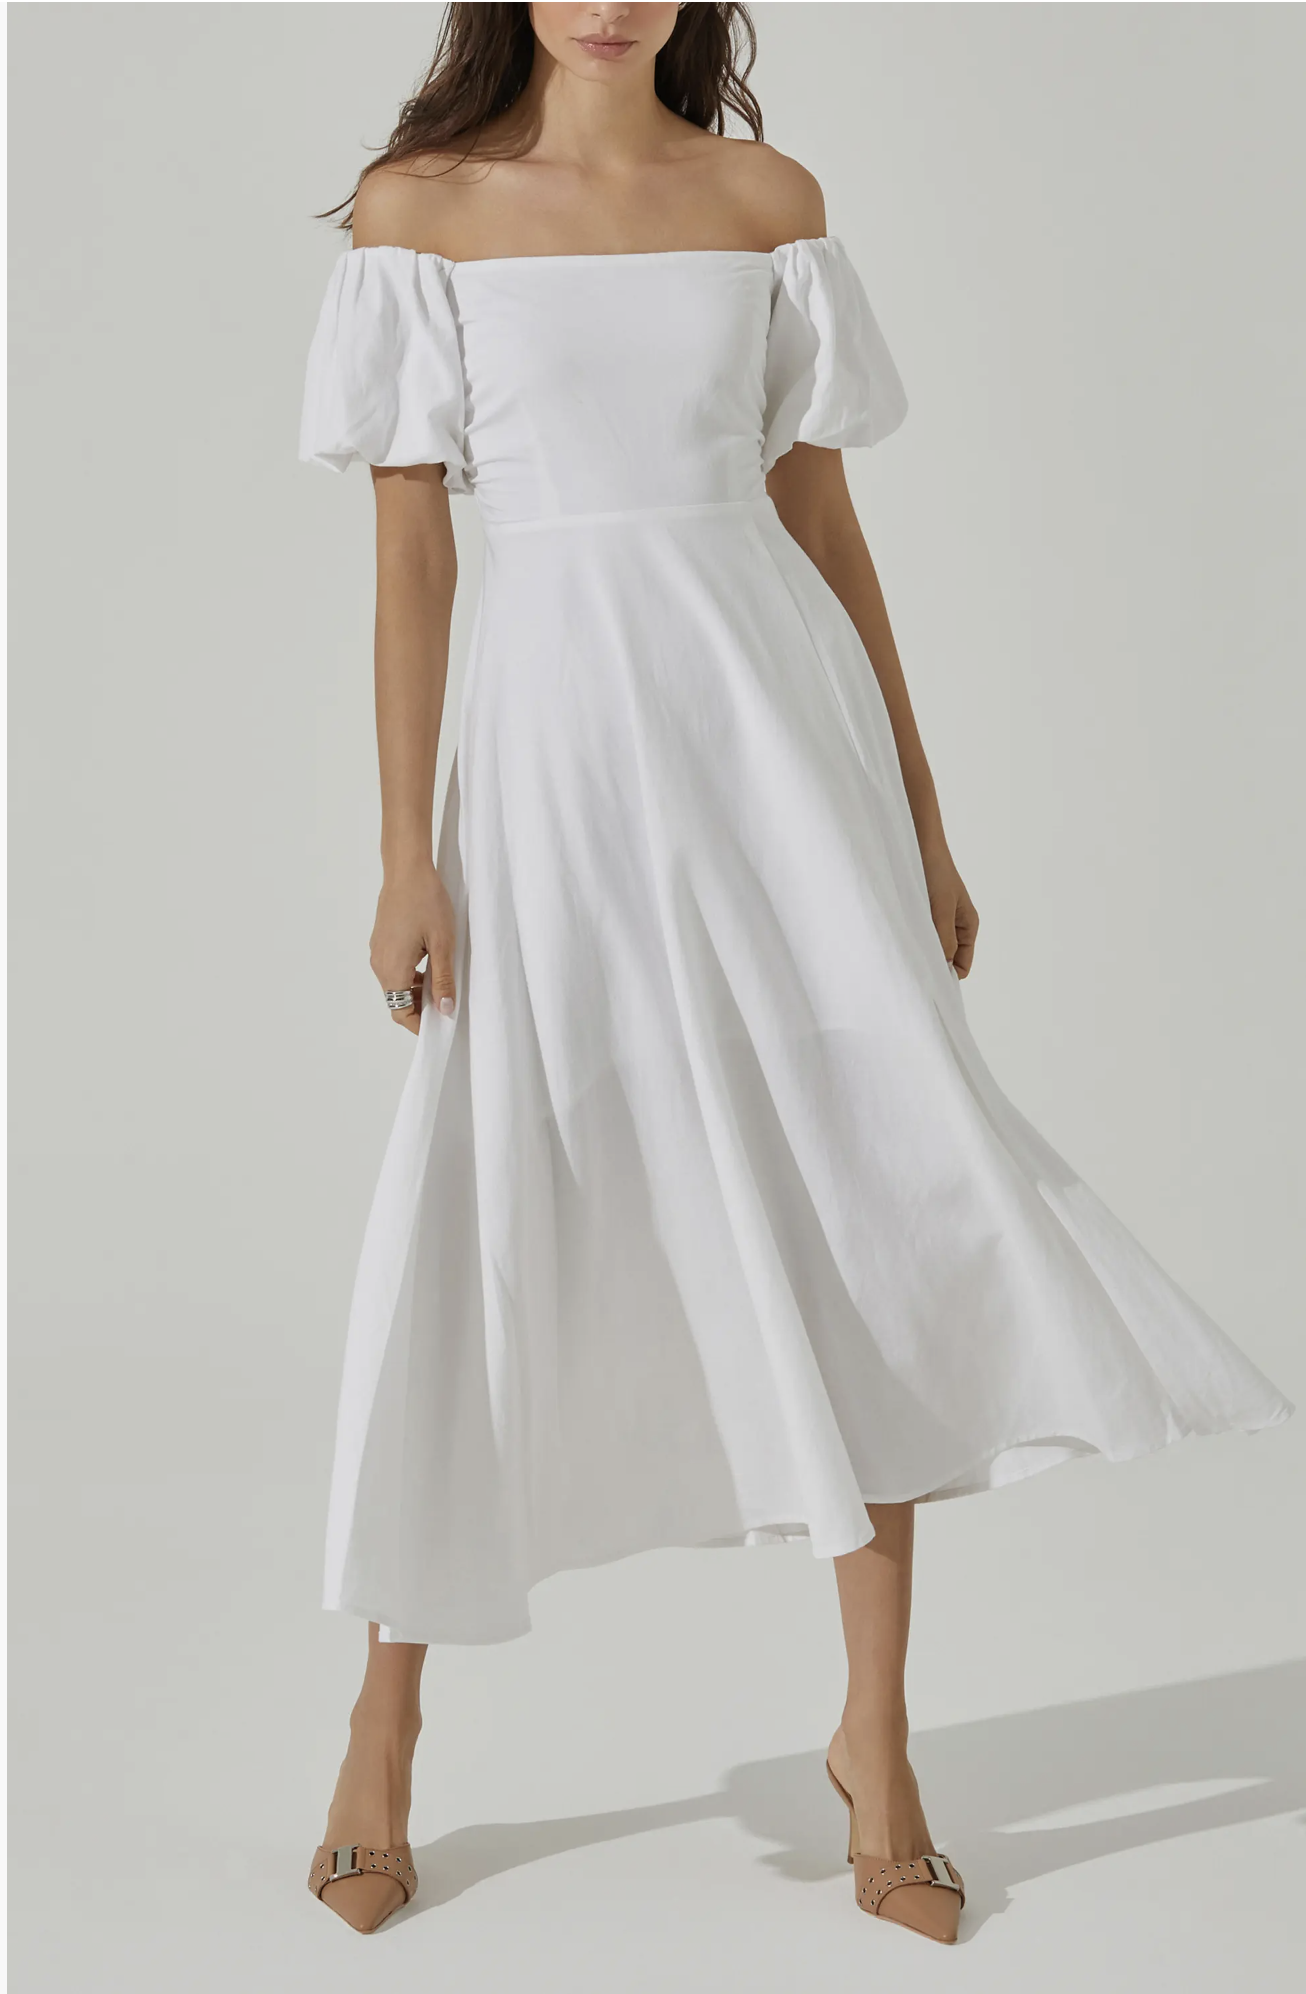 Discover the elegance and versatility of white linen dresses. From midi to maxi, strapless to tiered, explore the best styles for summer outings, elegant dinners, and casual chic days. White Linen Dress Outfit | White Linen Dresses For Summer | White Linen Dresses With Sleeves | Wite Linen Dresses For Sale | White Linen Dress With Pockets | White Linen Dresses For Ladies | Linen Dress Short | White Linen Dress Sleeveless | White Linen Dress Long | White Linen Dress Mini | White Summer Dress